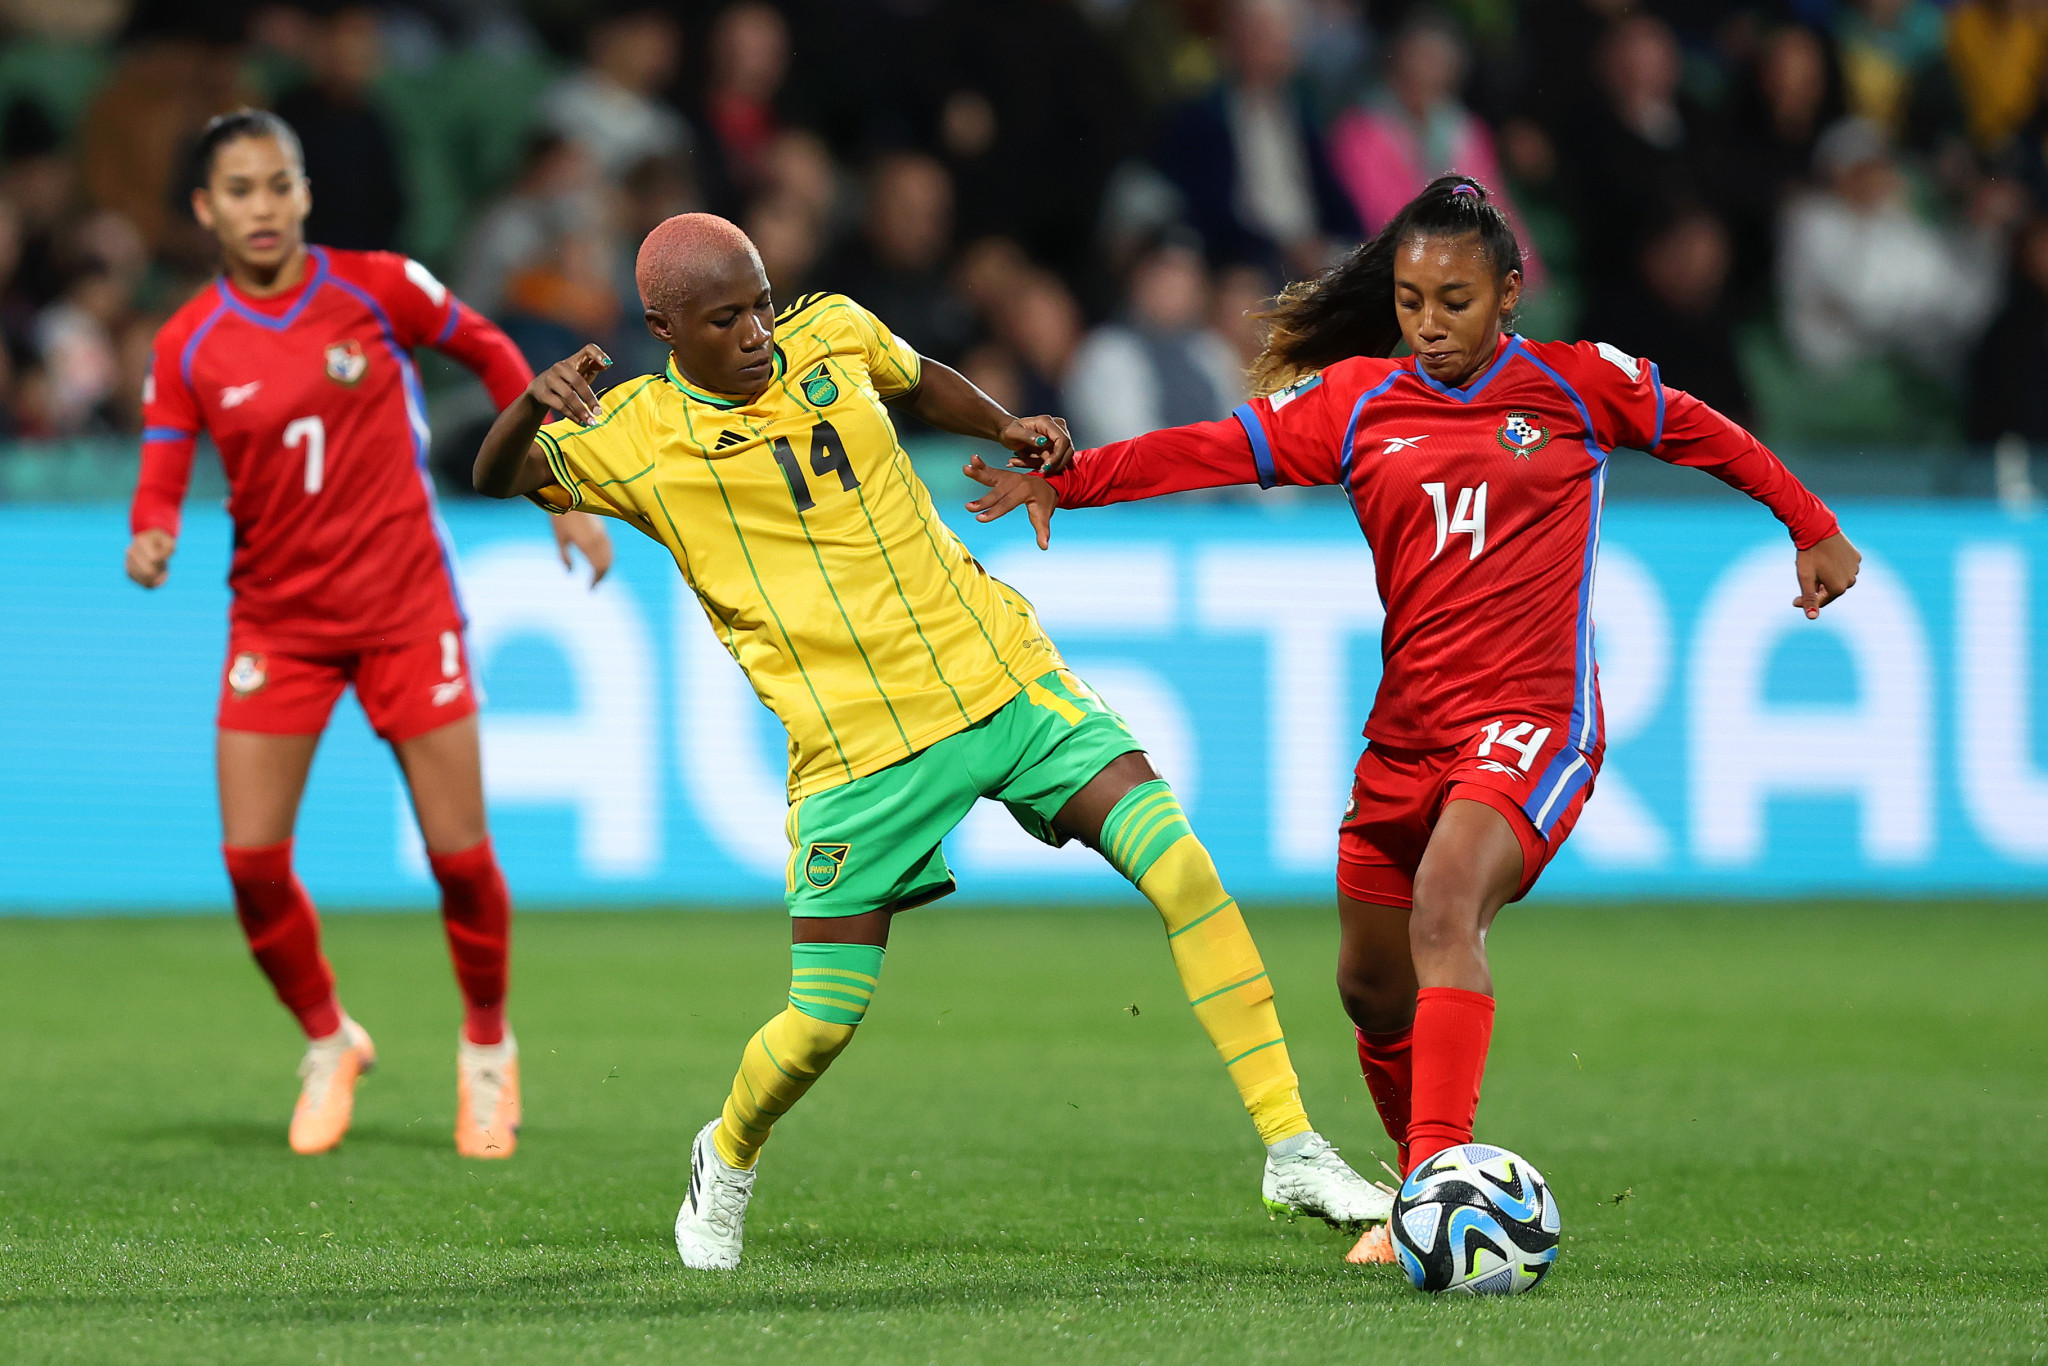 Jamaica won their first ever FIFA Women's World Cup match when they defeated Panama 1-0 ©Getty Images